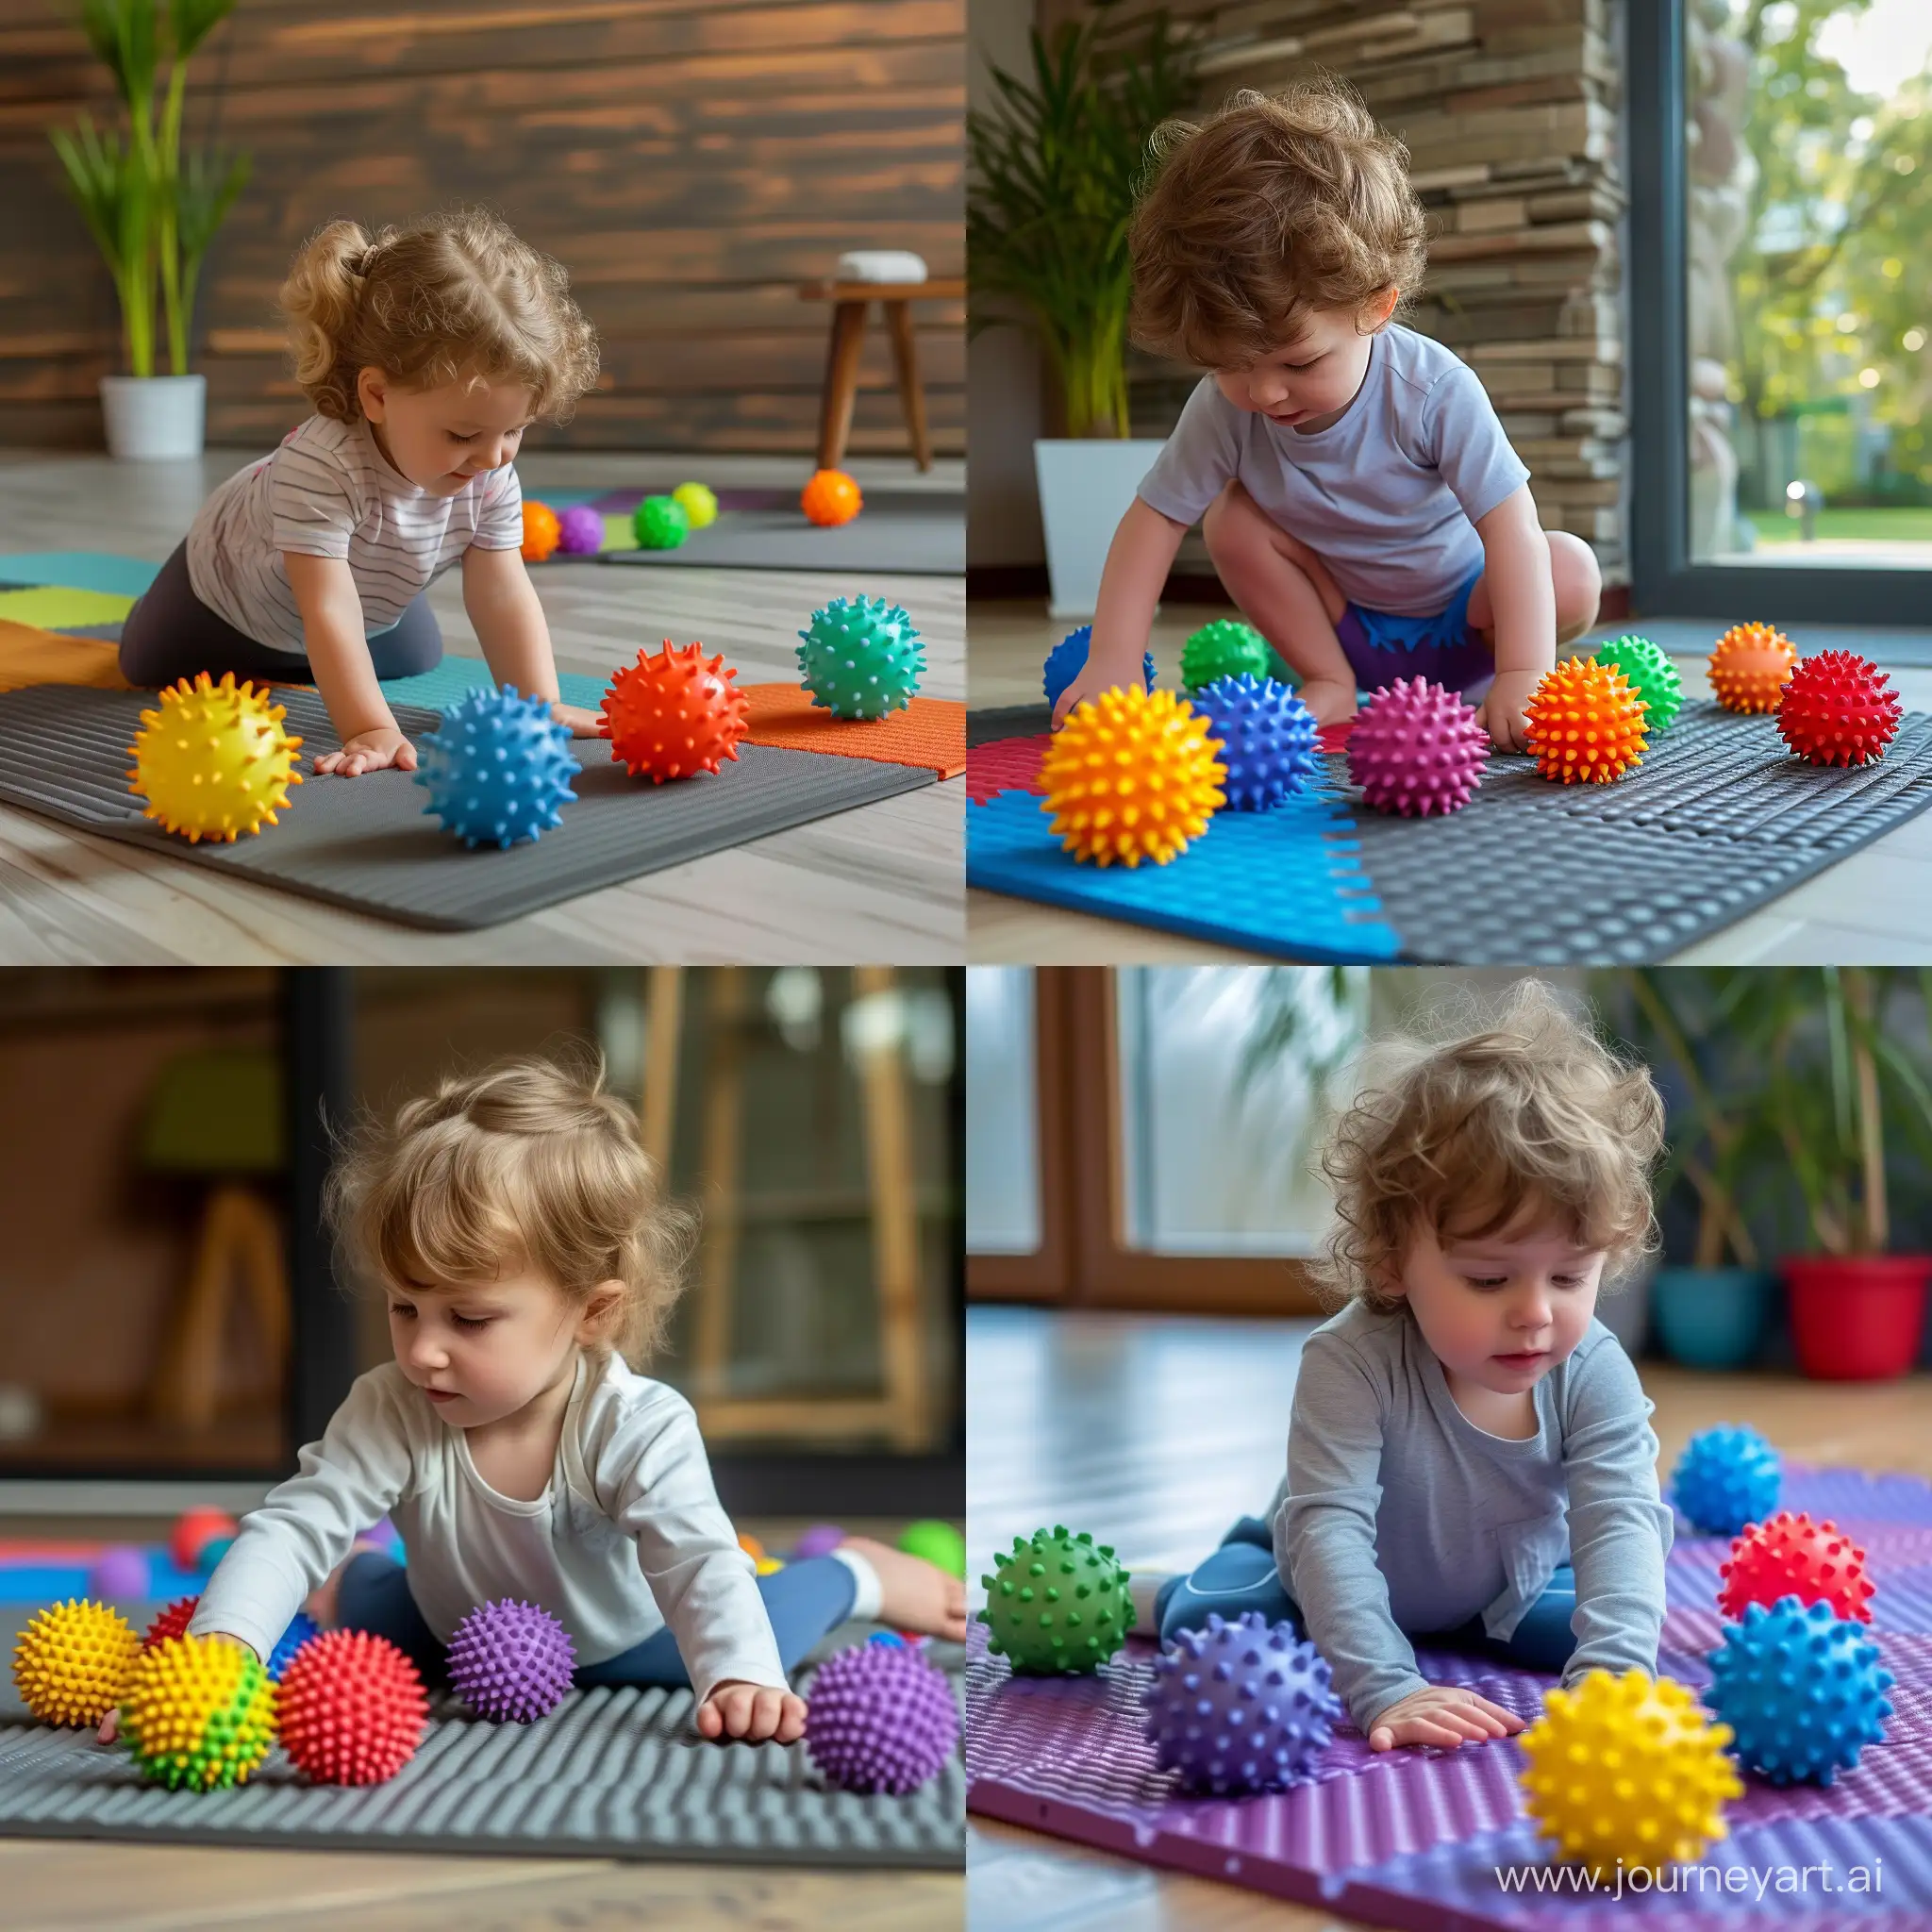 Toddler-Playing-with-Colorful-Massage-Balls-on-Fitness-Mat